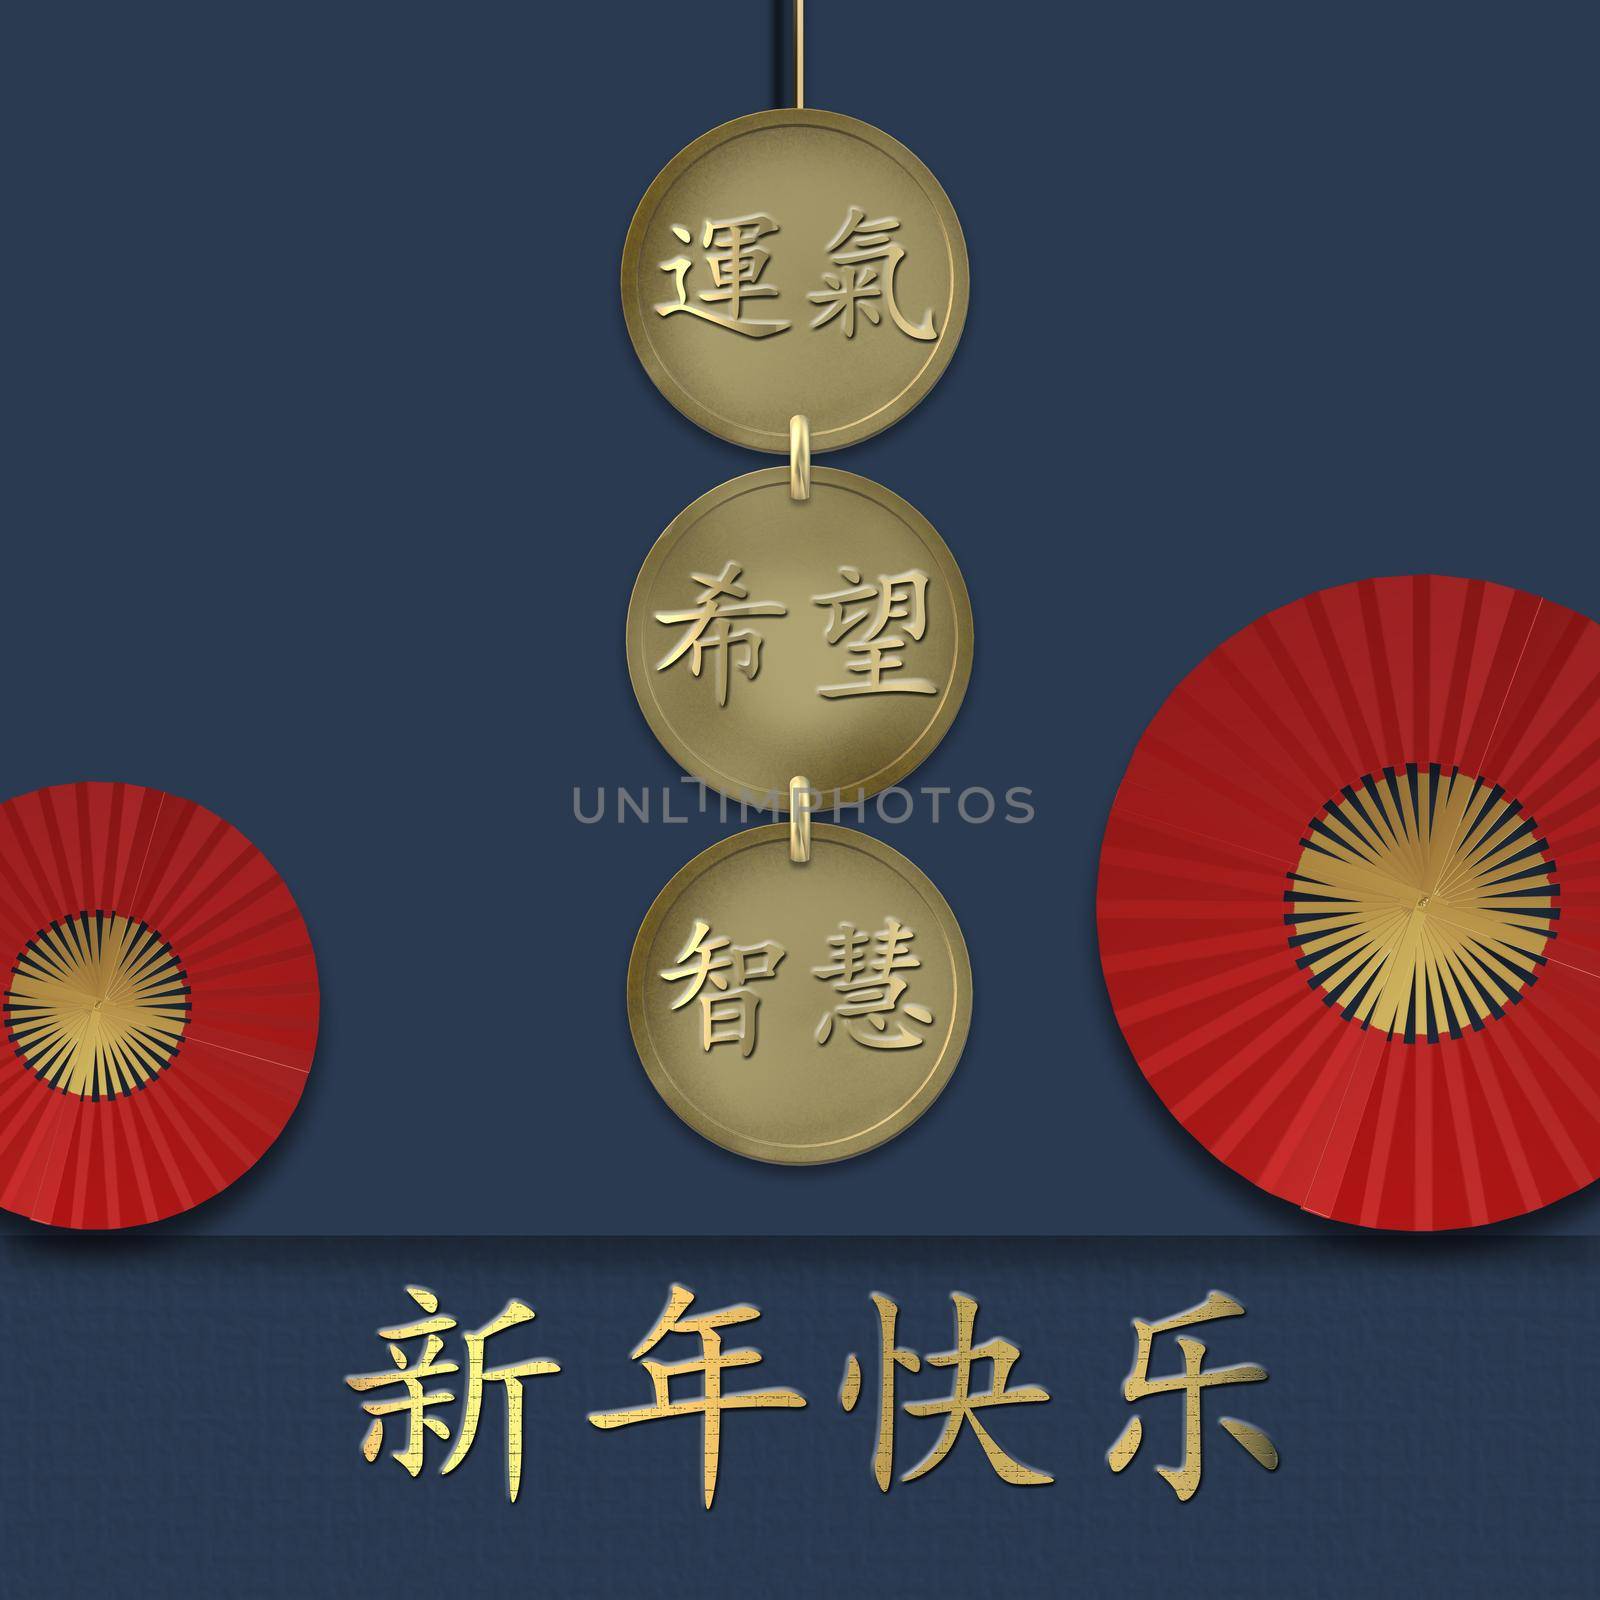 Chinese New Year design with lucky coins over blue. Red Chinese lucky coins with text, Chinese translation Happy New Year, Luck, Hope, Wisdom. Design for greetings, Asian card. 3D illustration